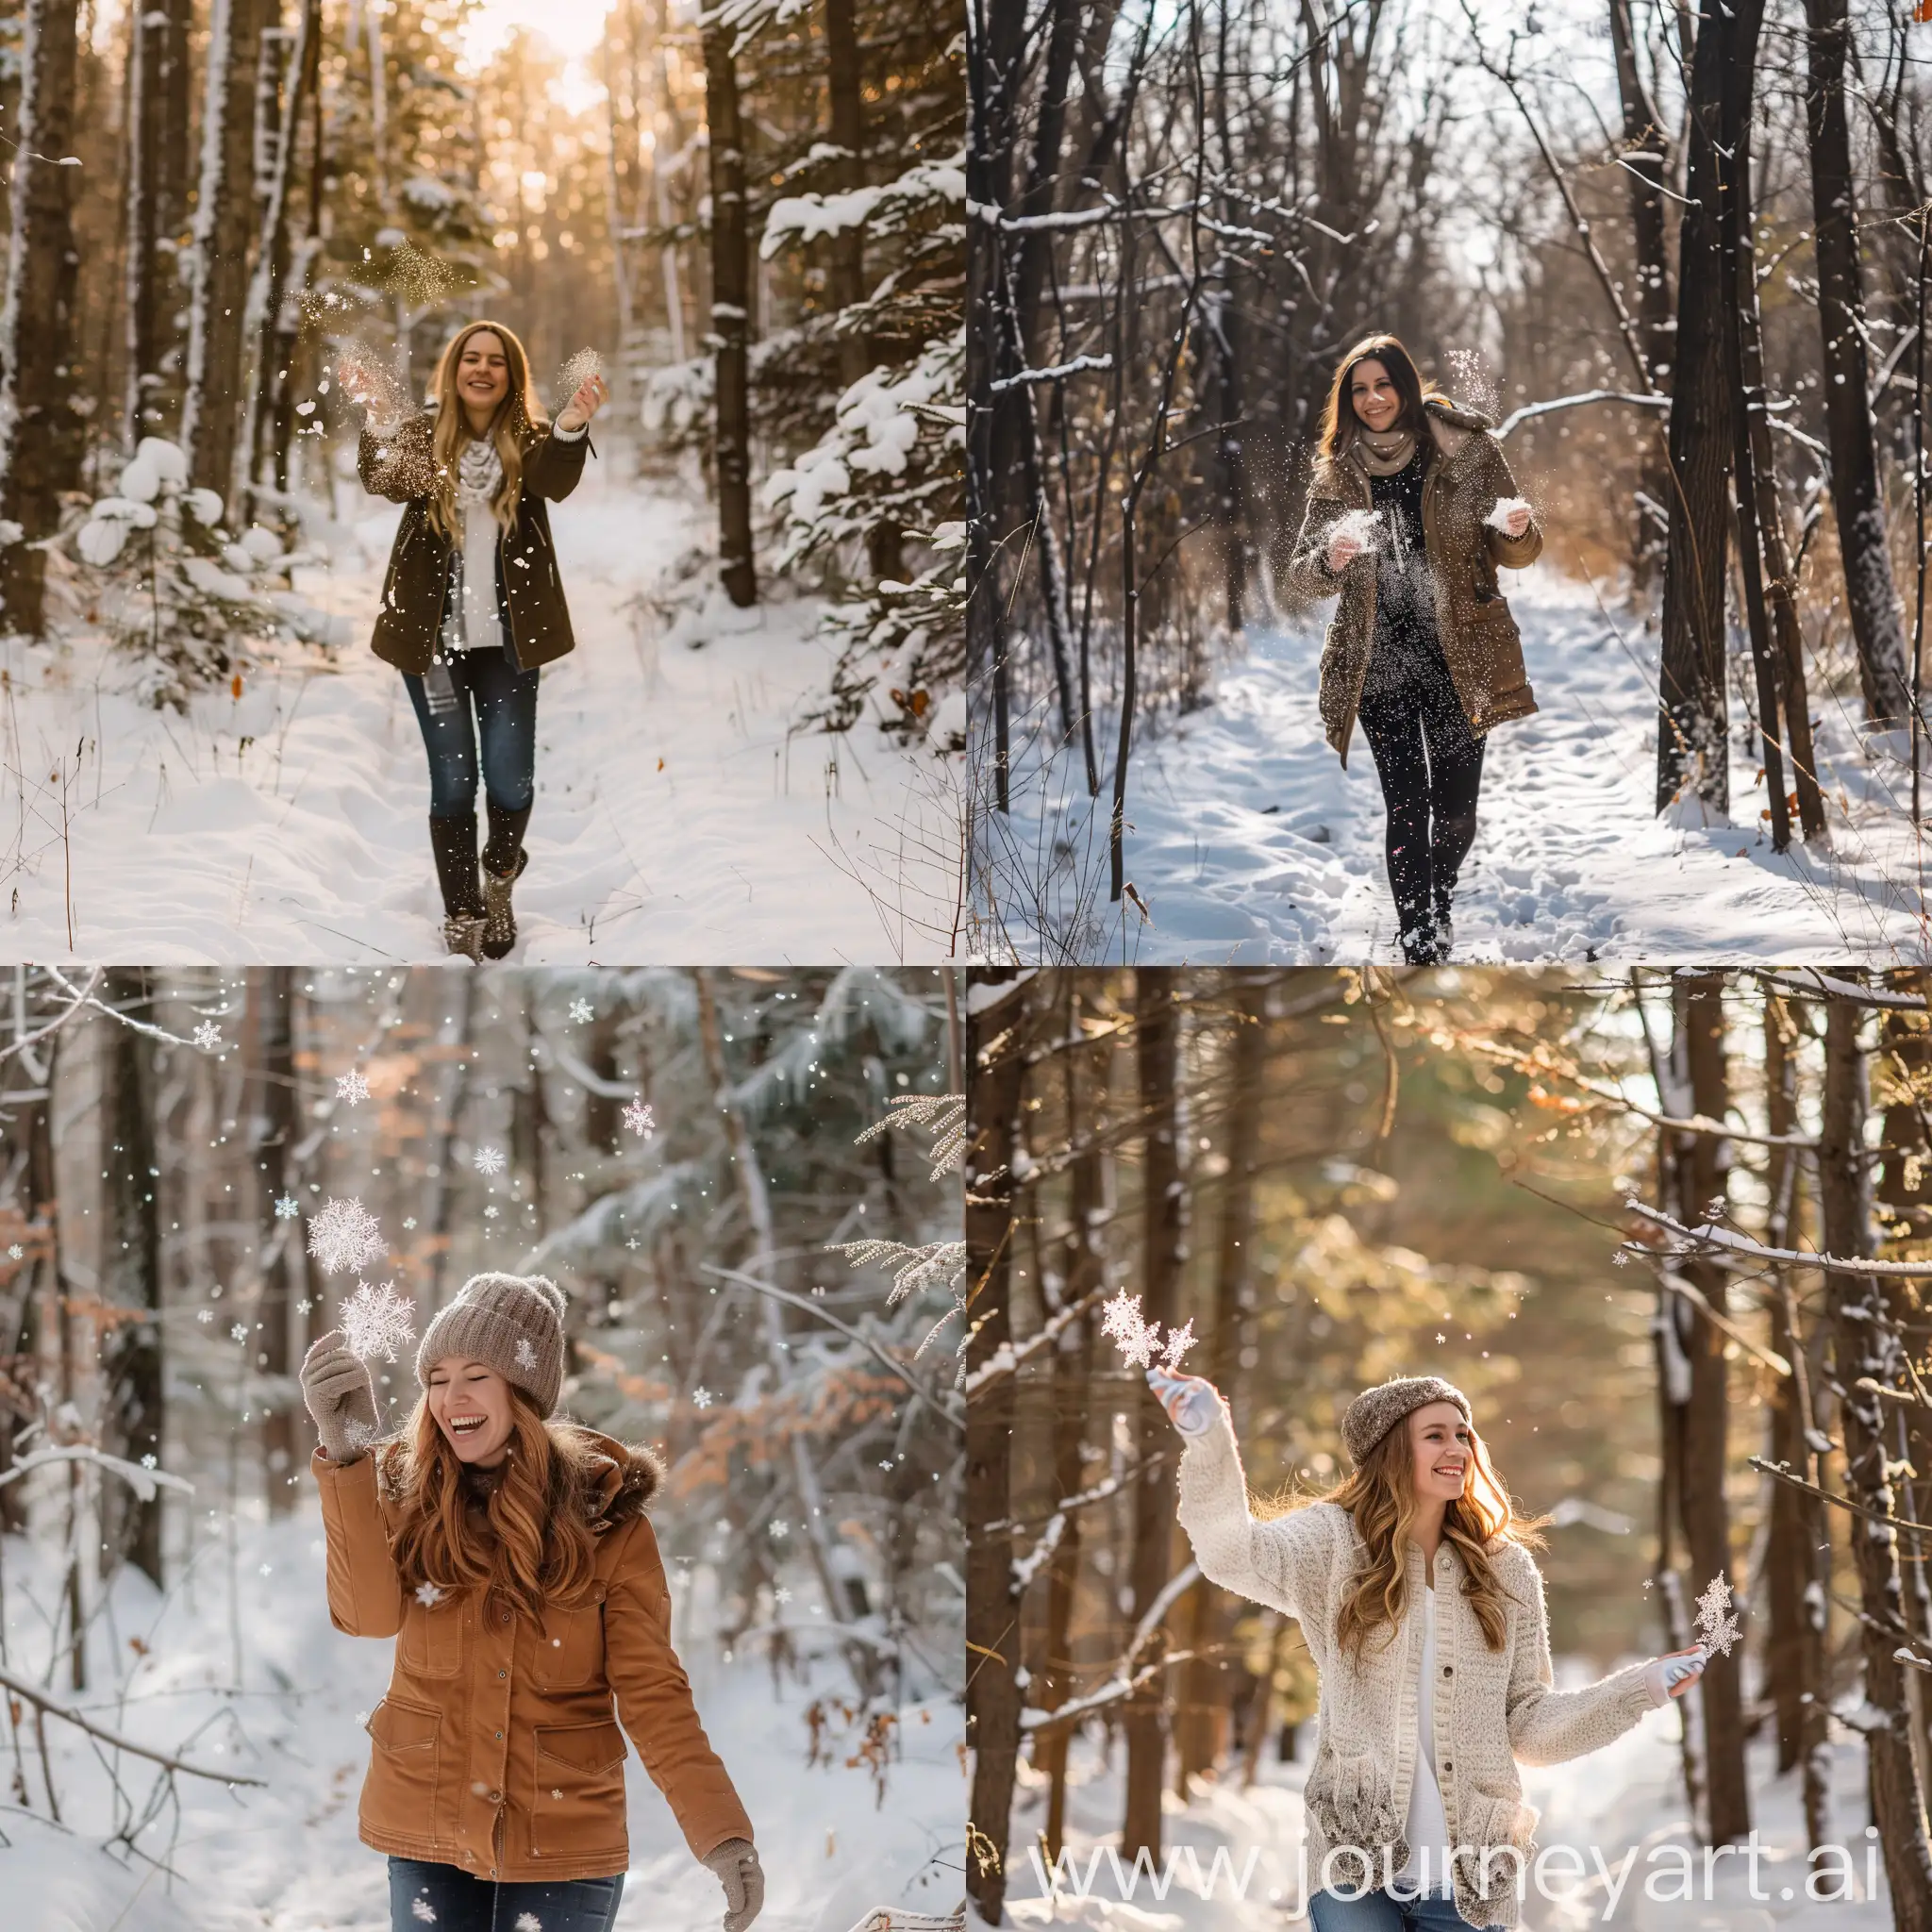 woman walking through snowy forest. catching snowflakes.  smiling